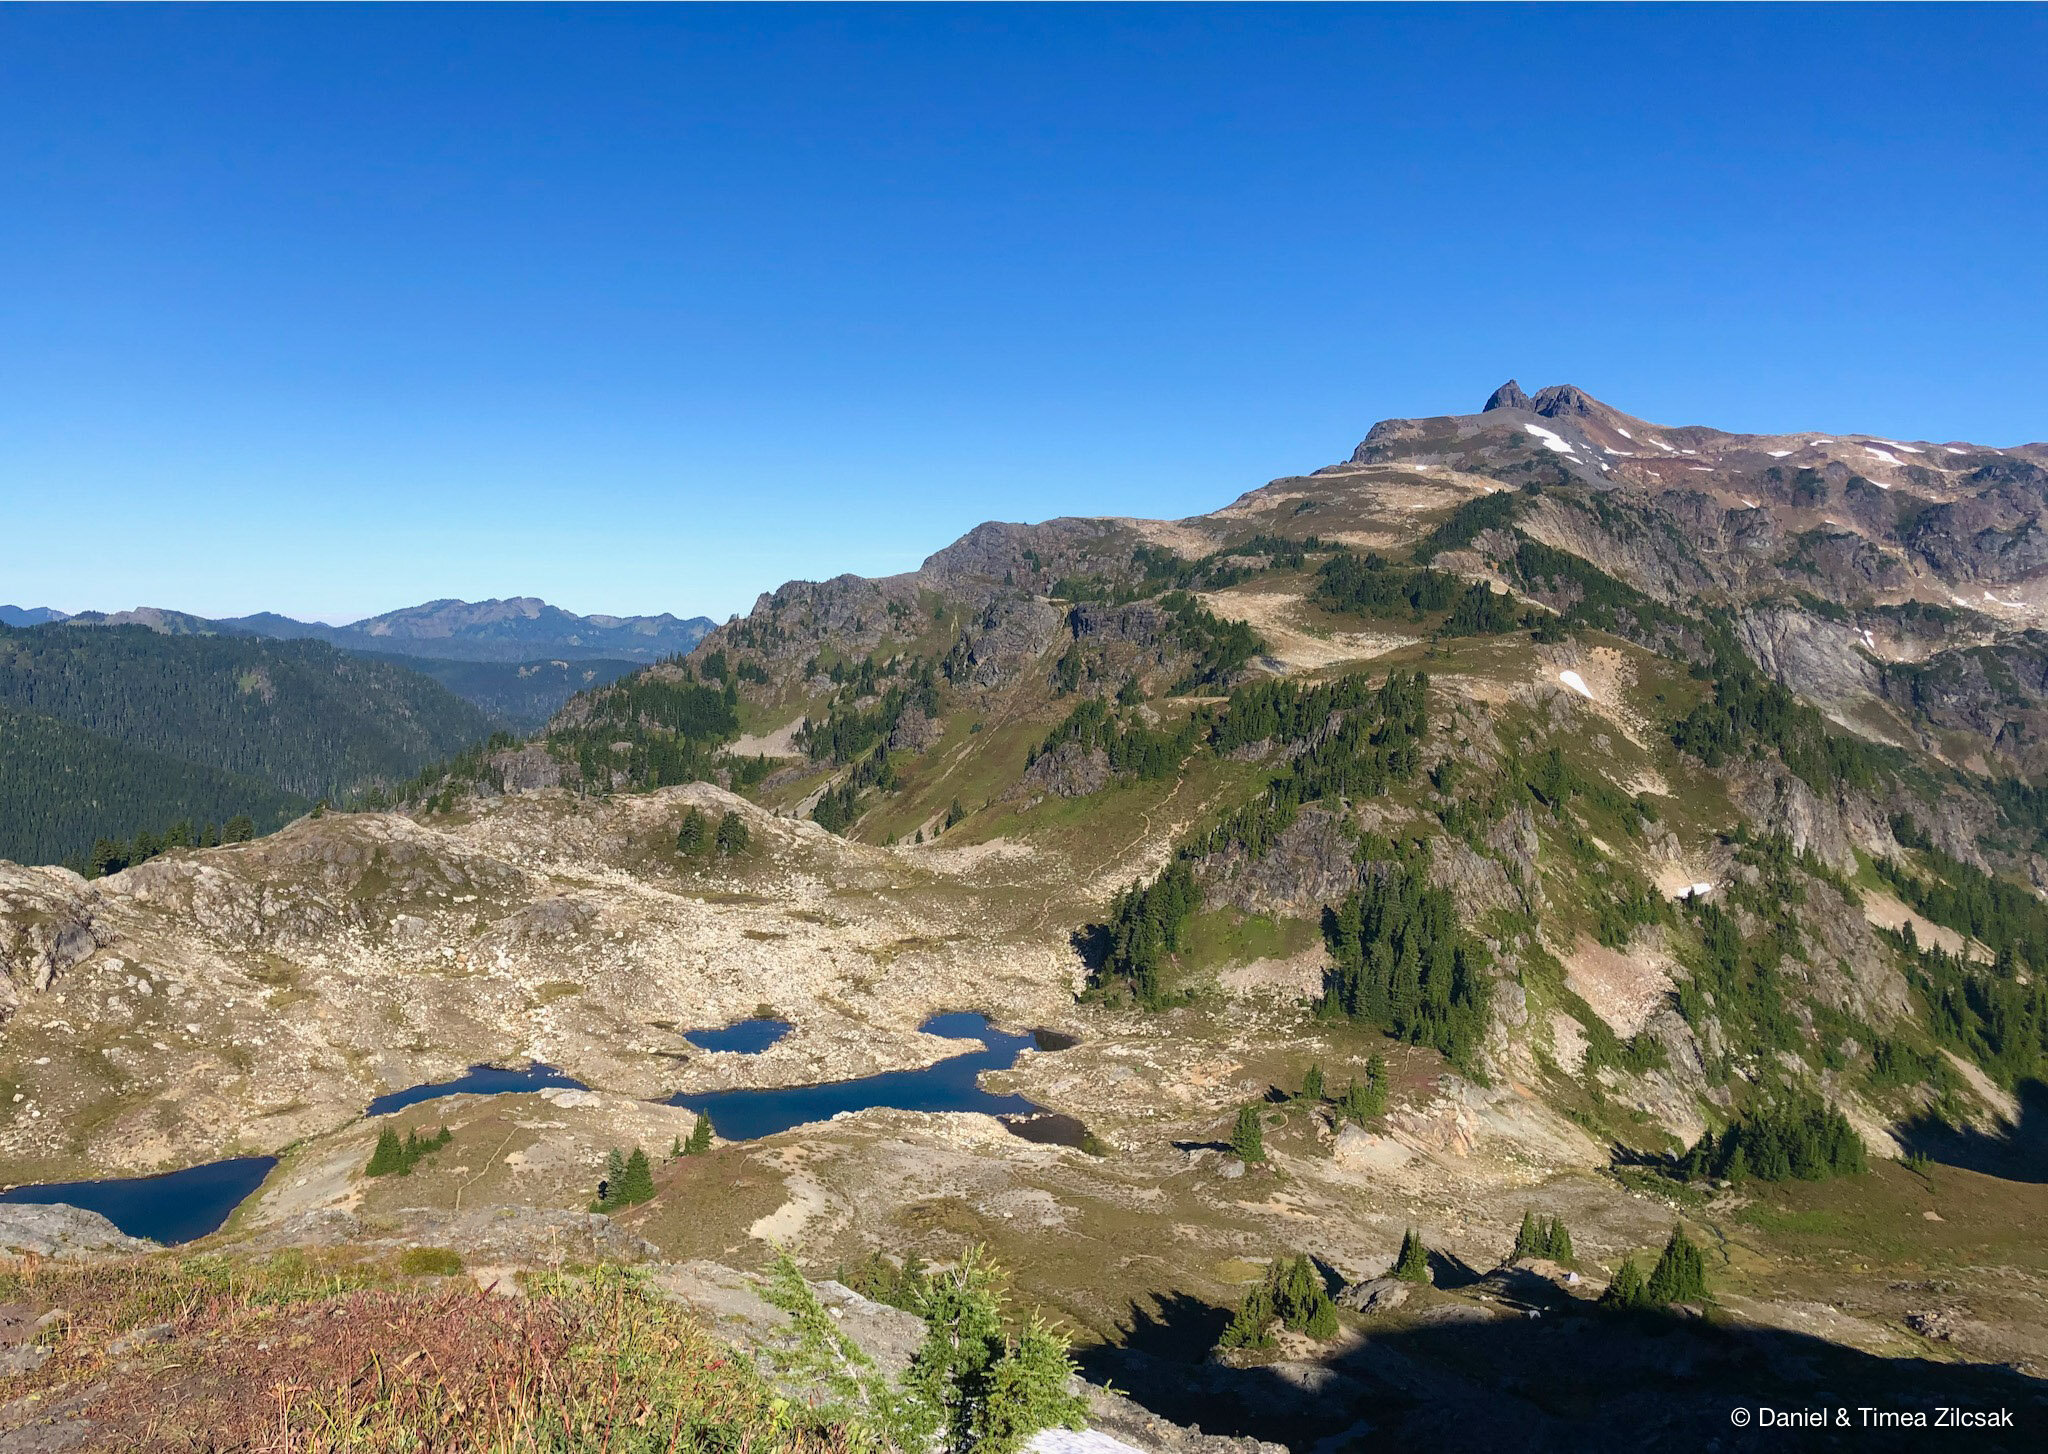 View of Tomyhoi Peak and trial from Yellow Aster Butte's false summit